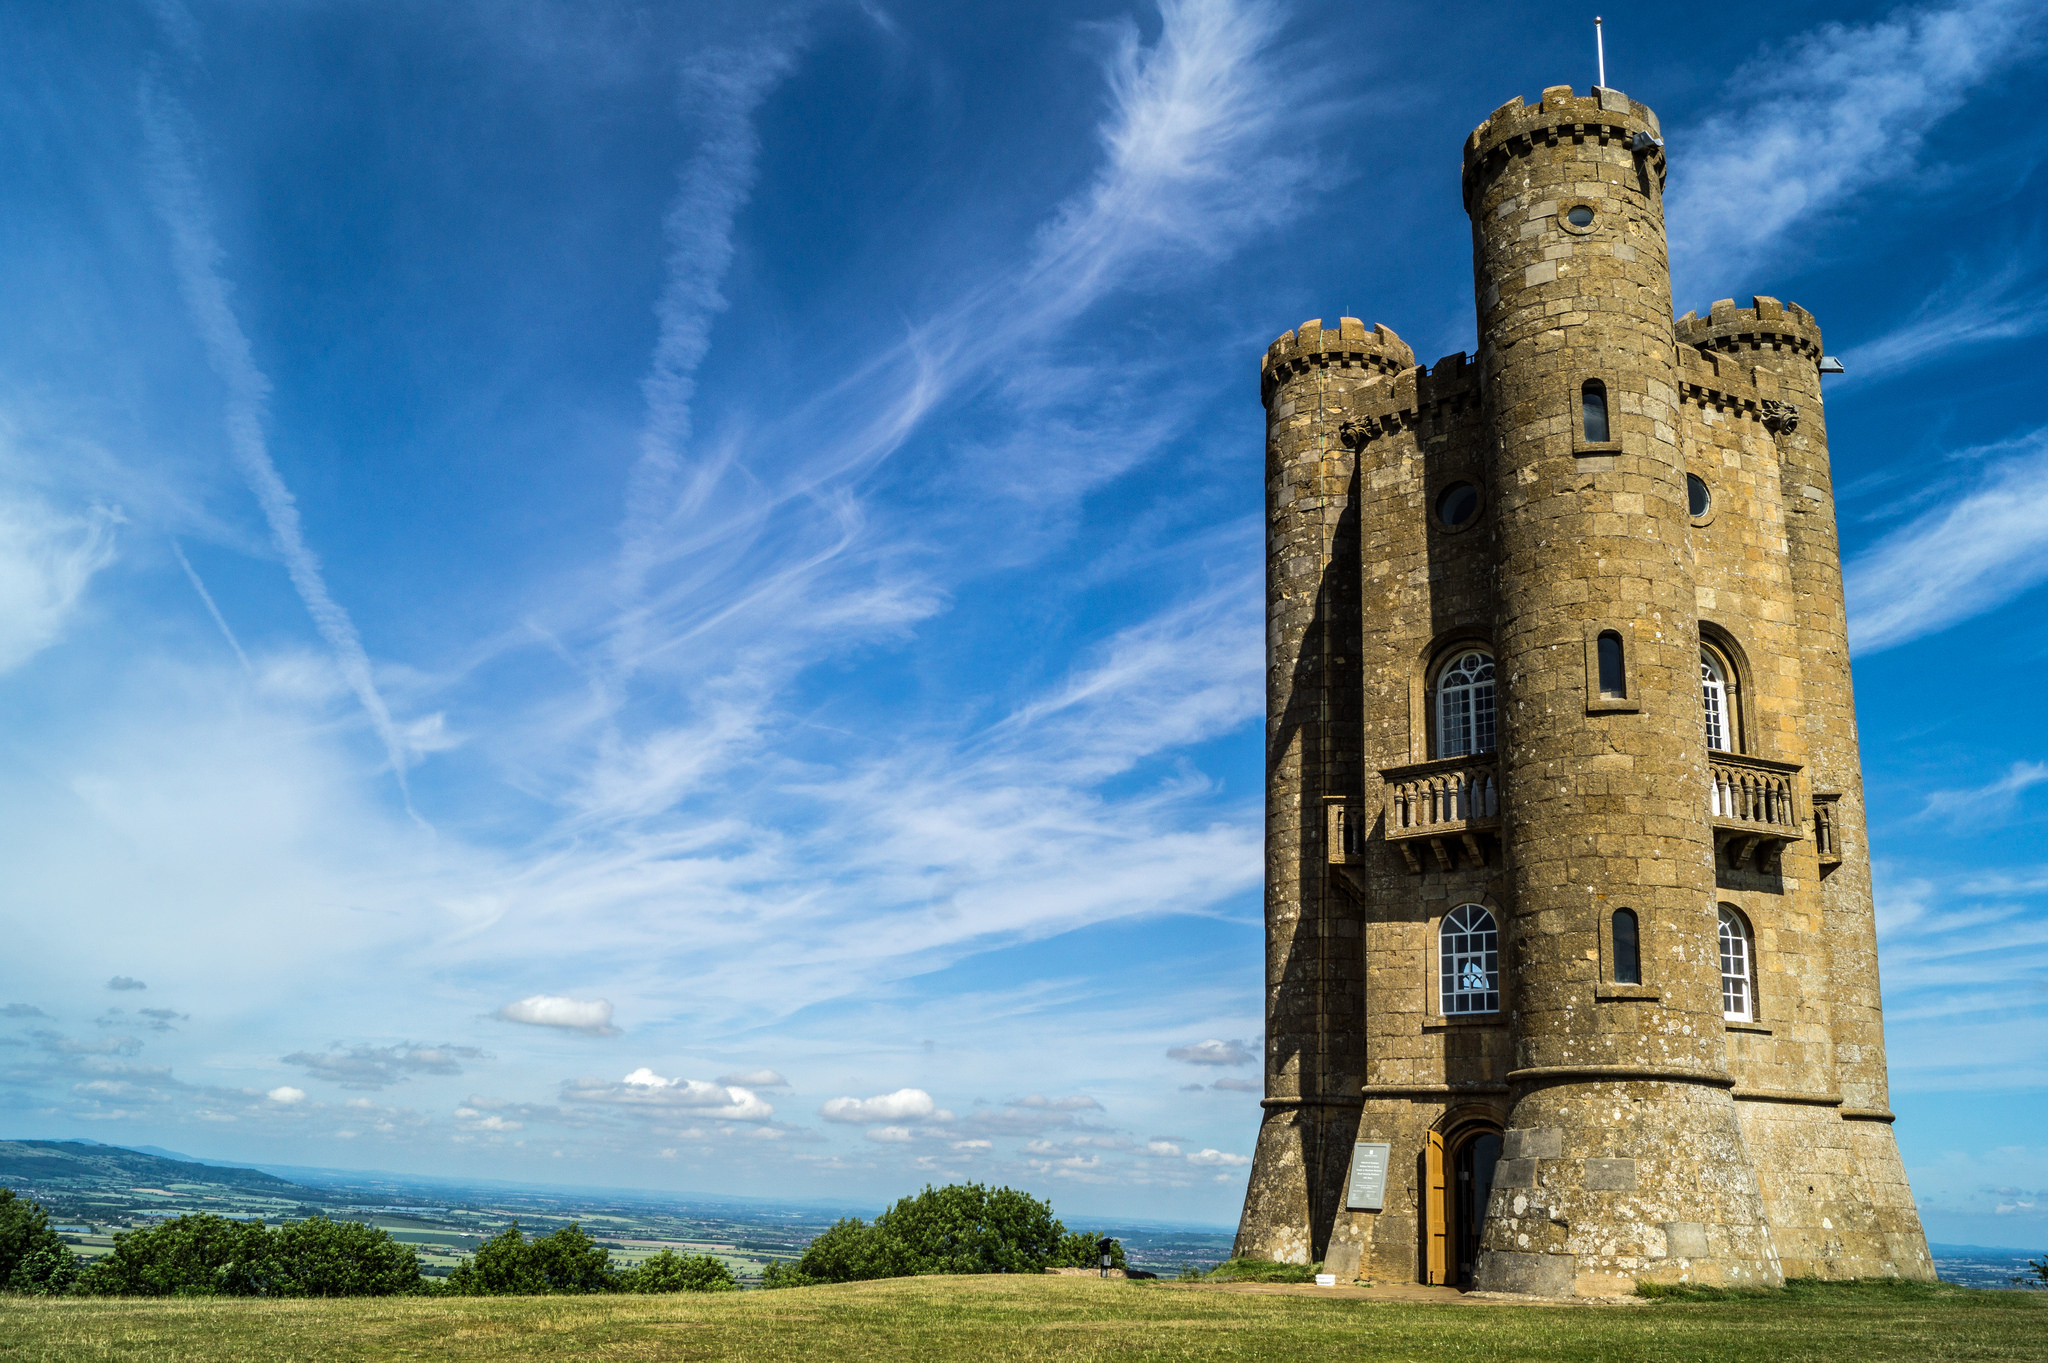 Nice Images Collection: Broadway Tower, Worcestershire Desktop Wallpapers